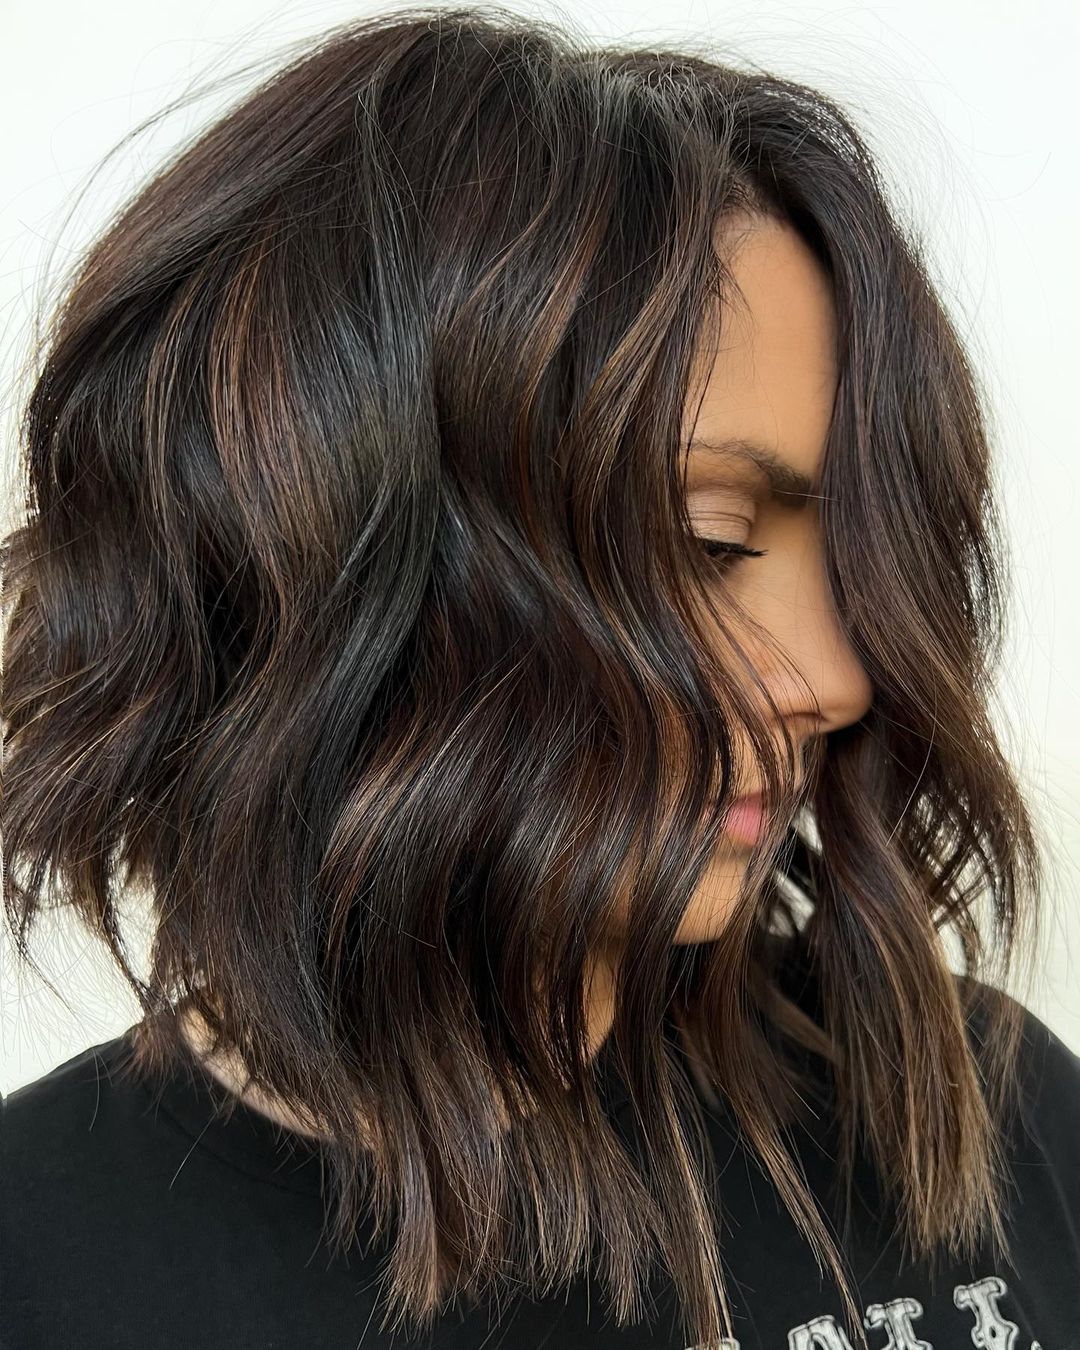 Short Black Hair with Brown Highlights